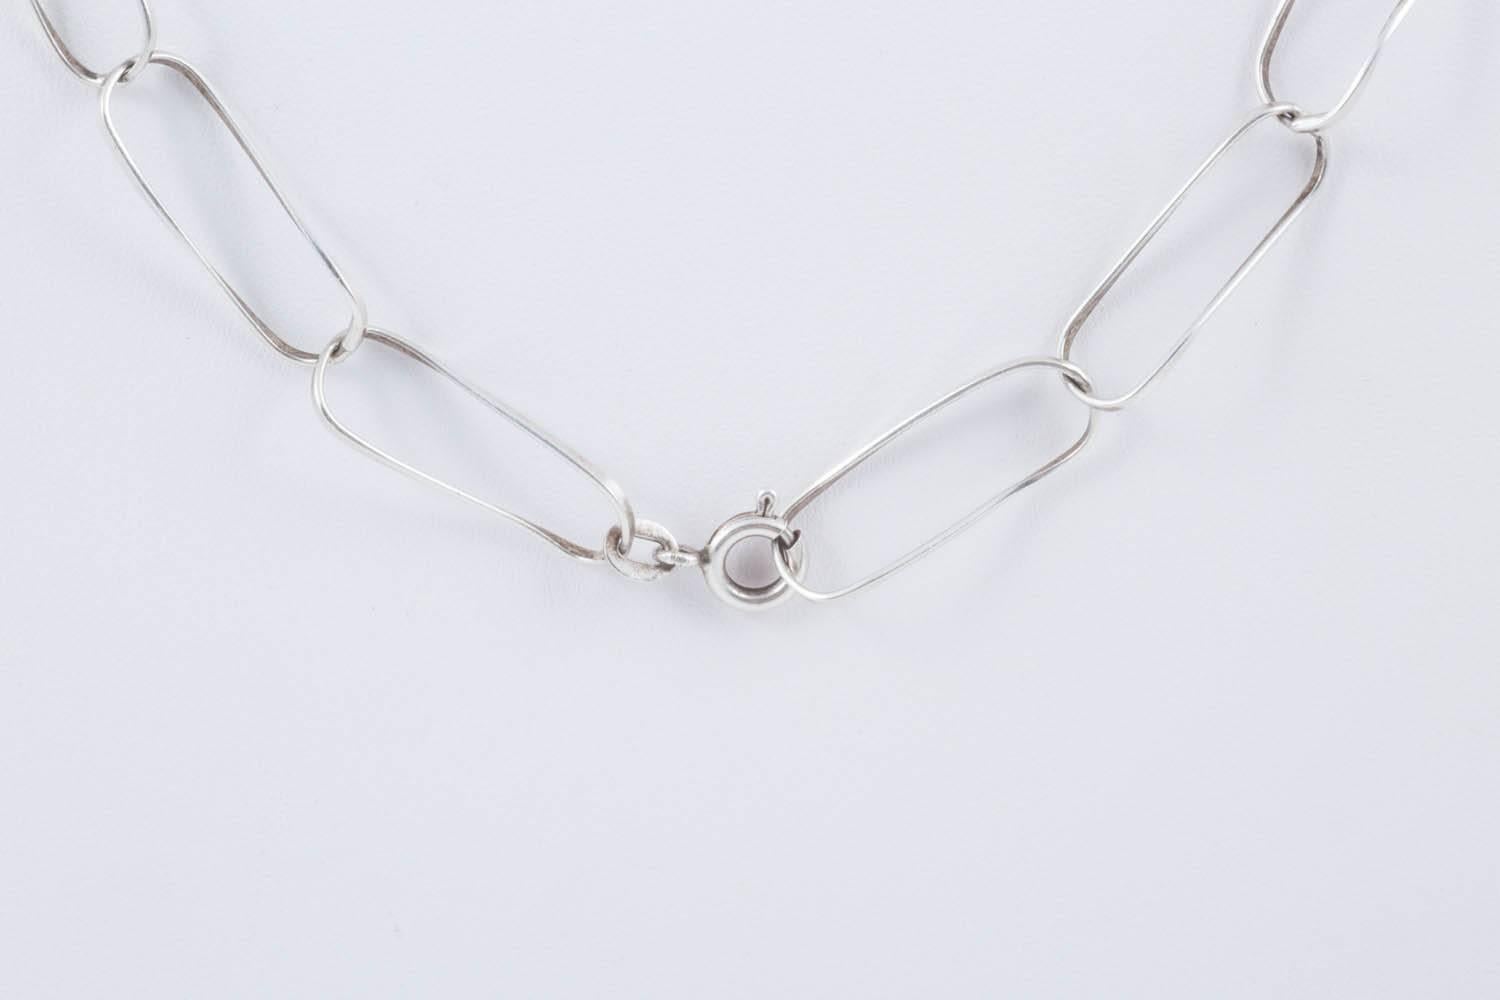 Women's or Men's Sterling Silver hand made modernist cube and chain necklace, circa 1970s 